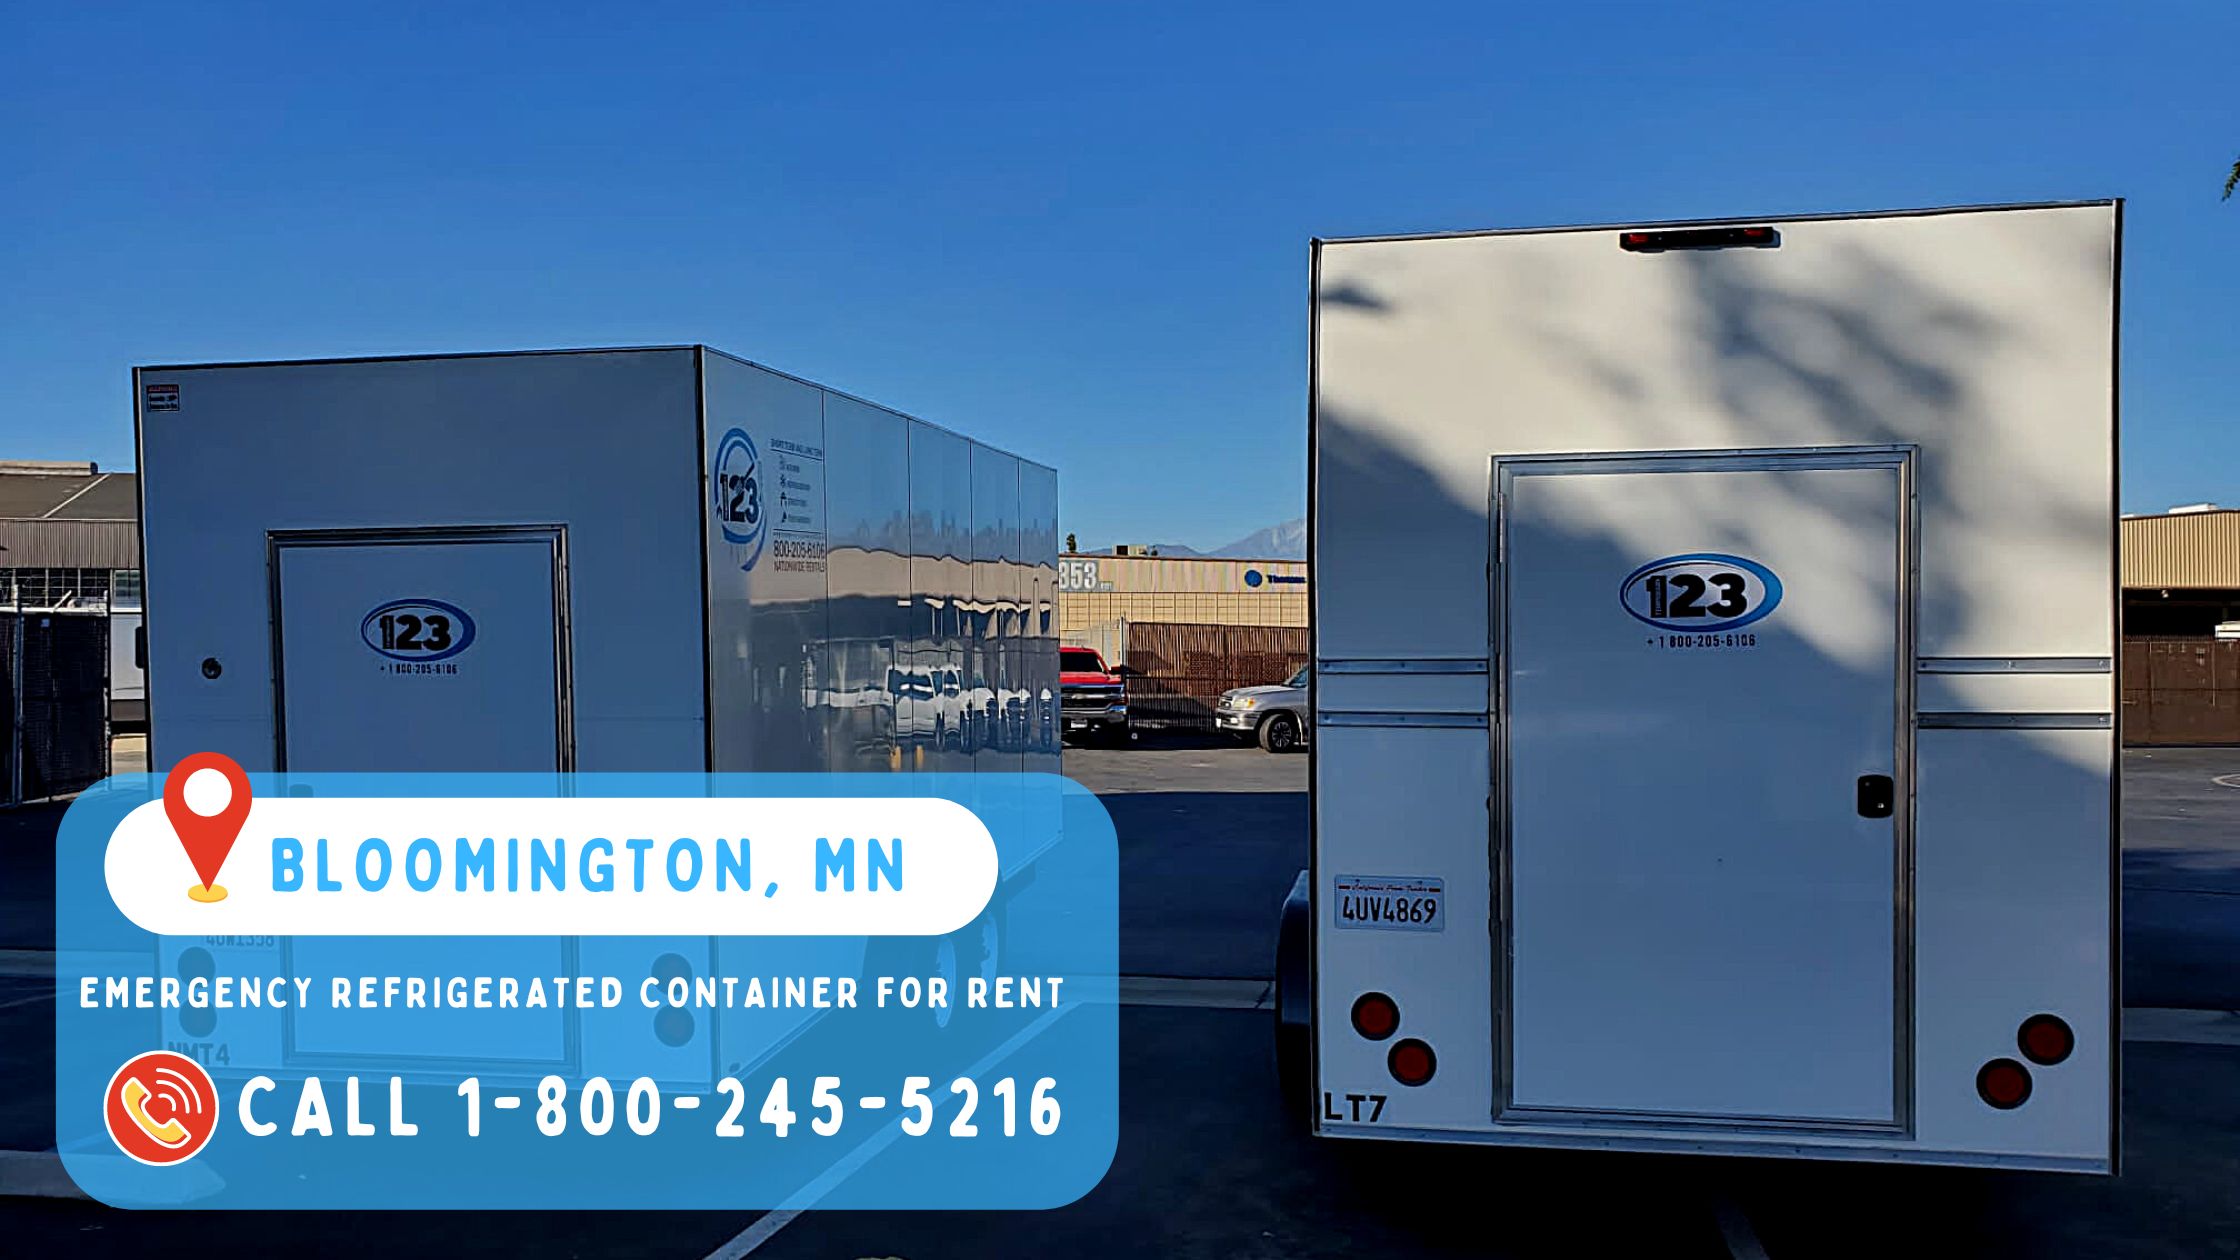 Emergency refrigerated container for rent in Bloomington